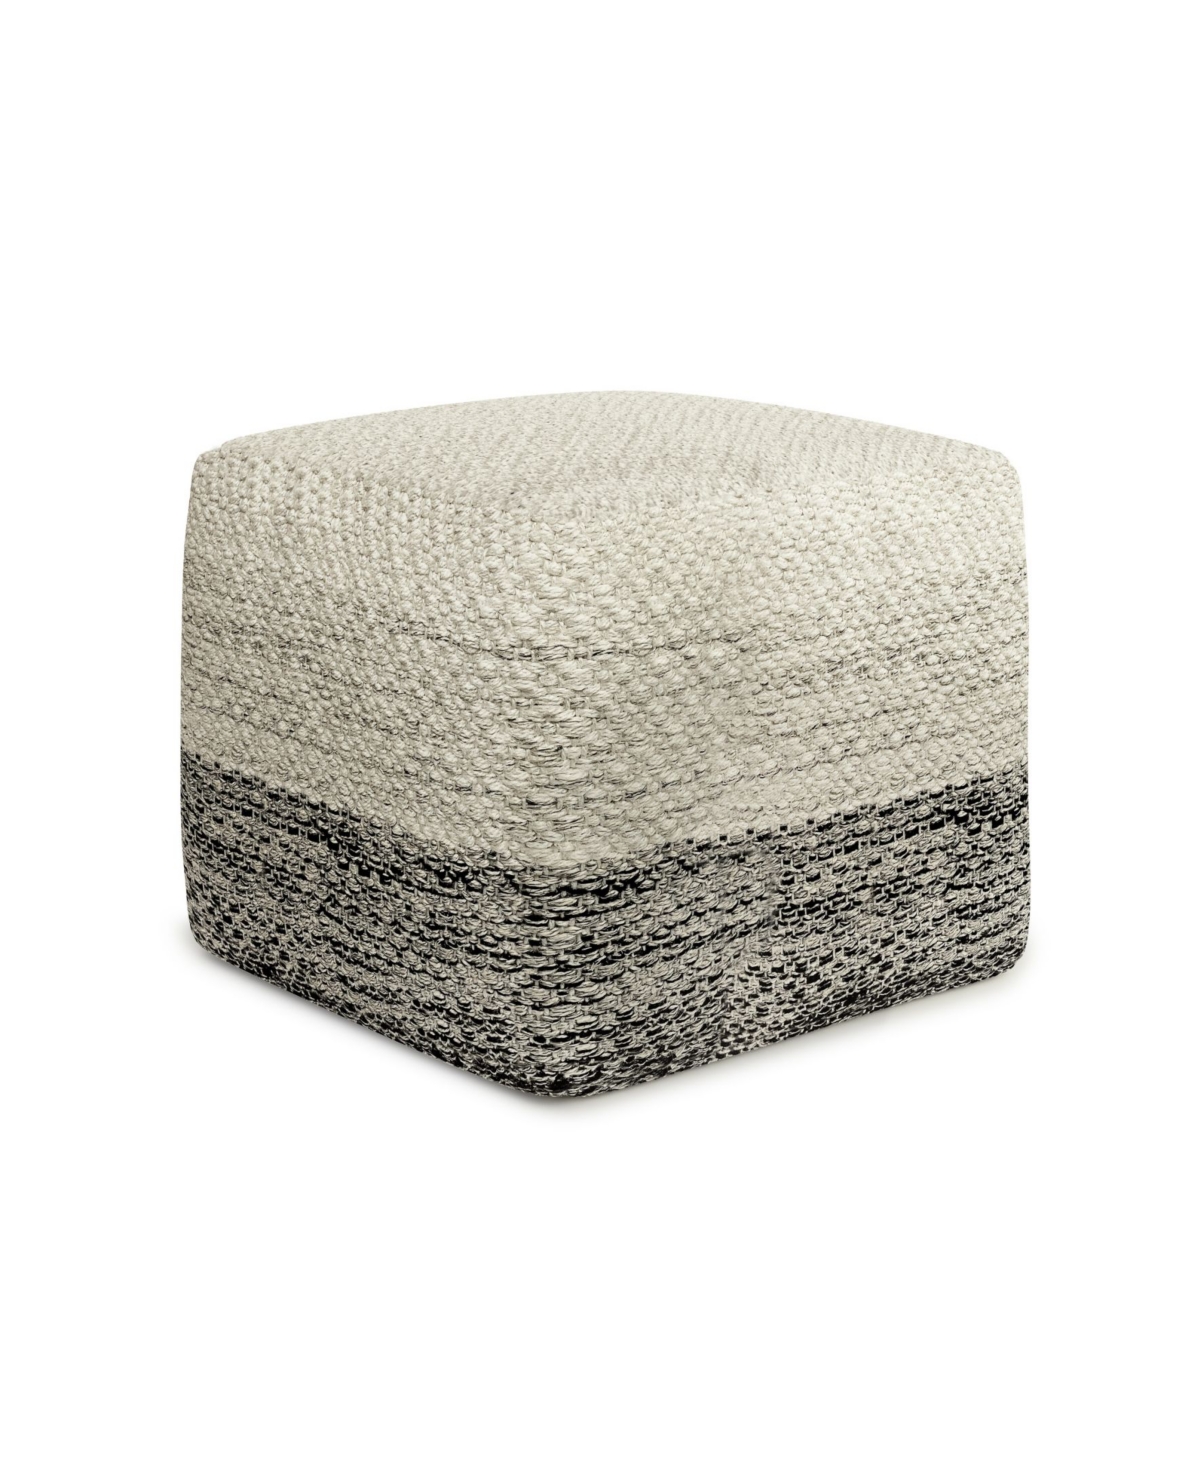 Macy's Macie Square Woven Outdoor And Indoor Pouf In Gray And White